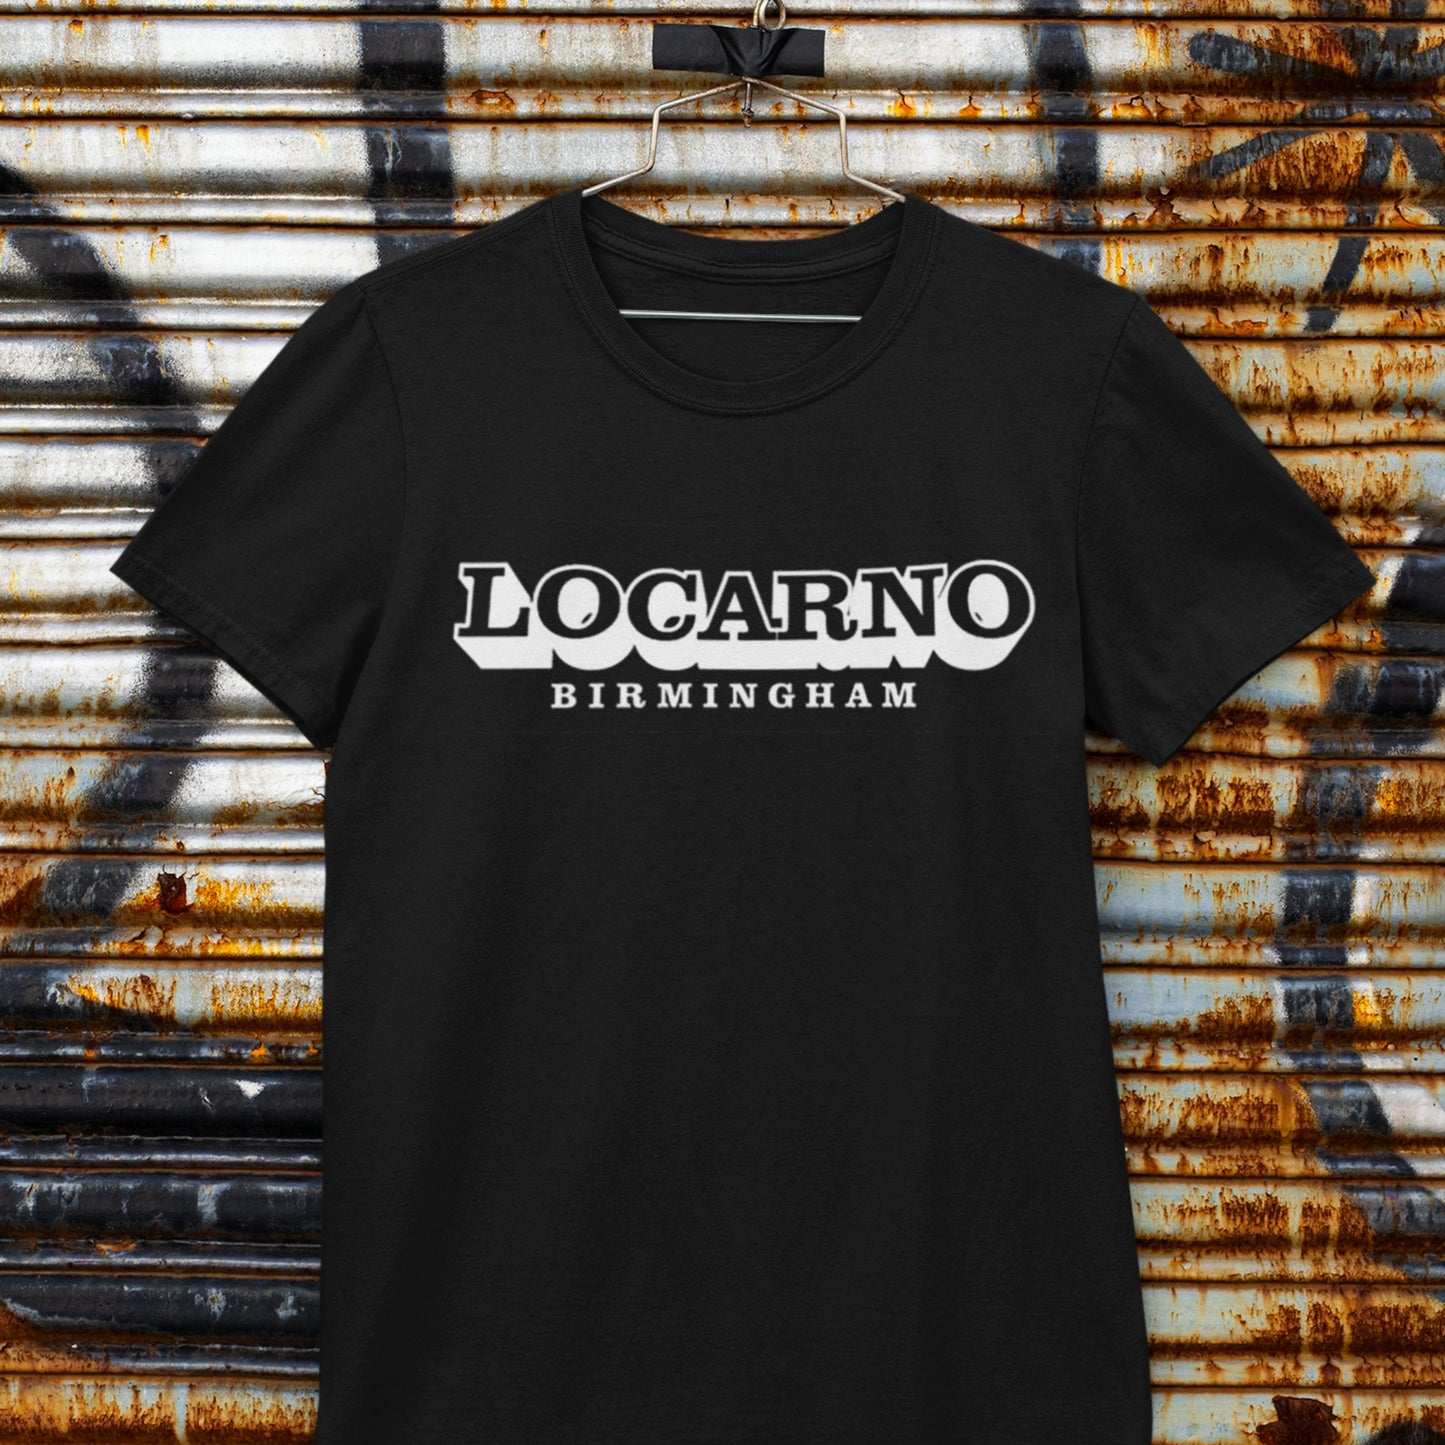 Locarno - Birmingham T-shirt - Dirty Stop Outs